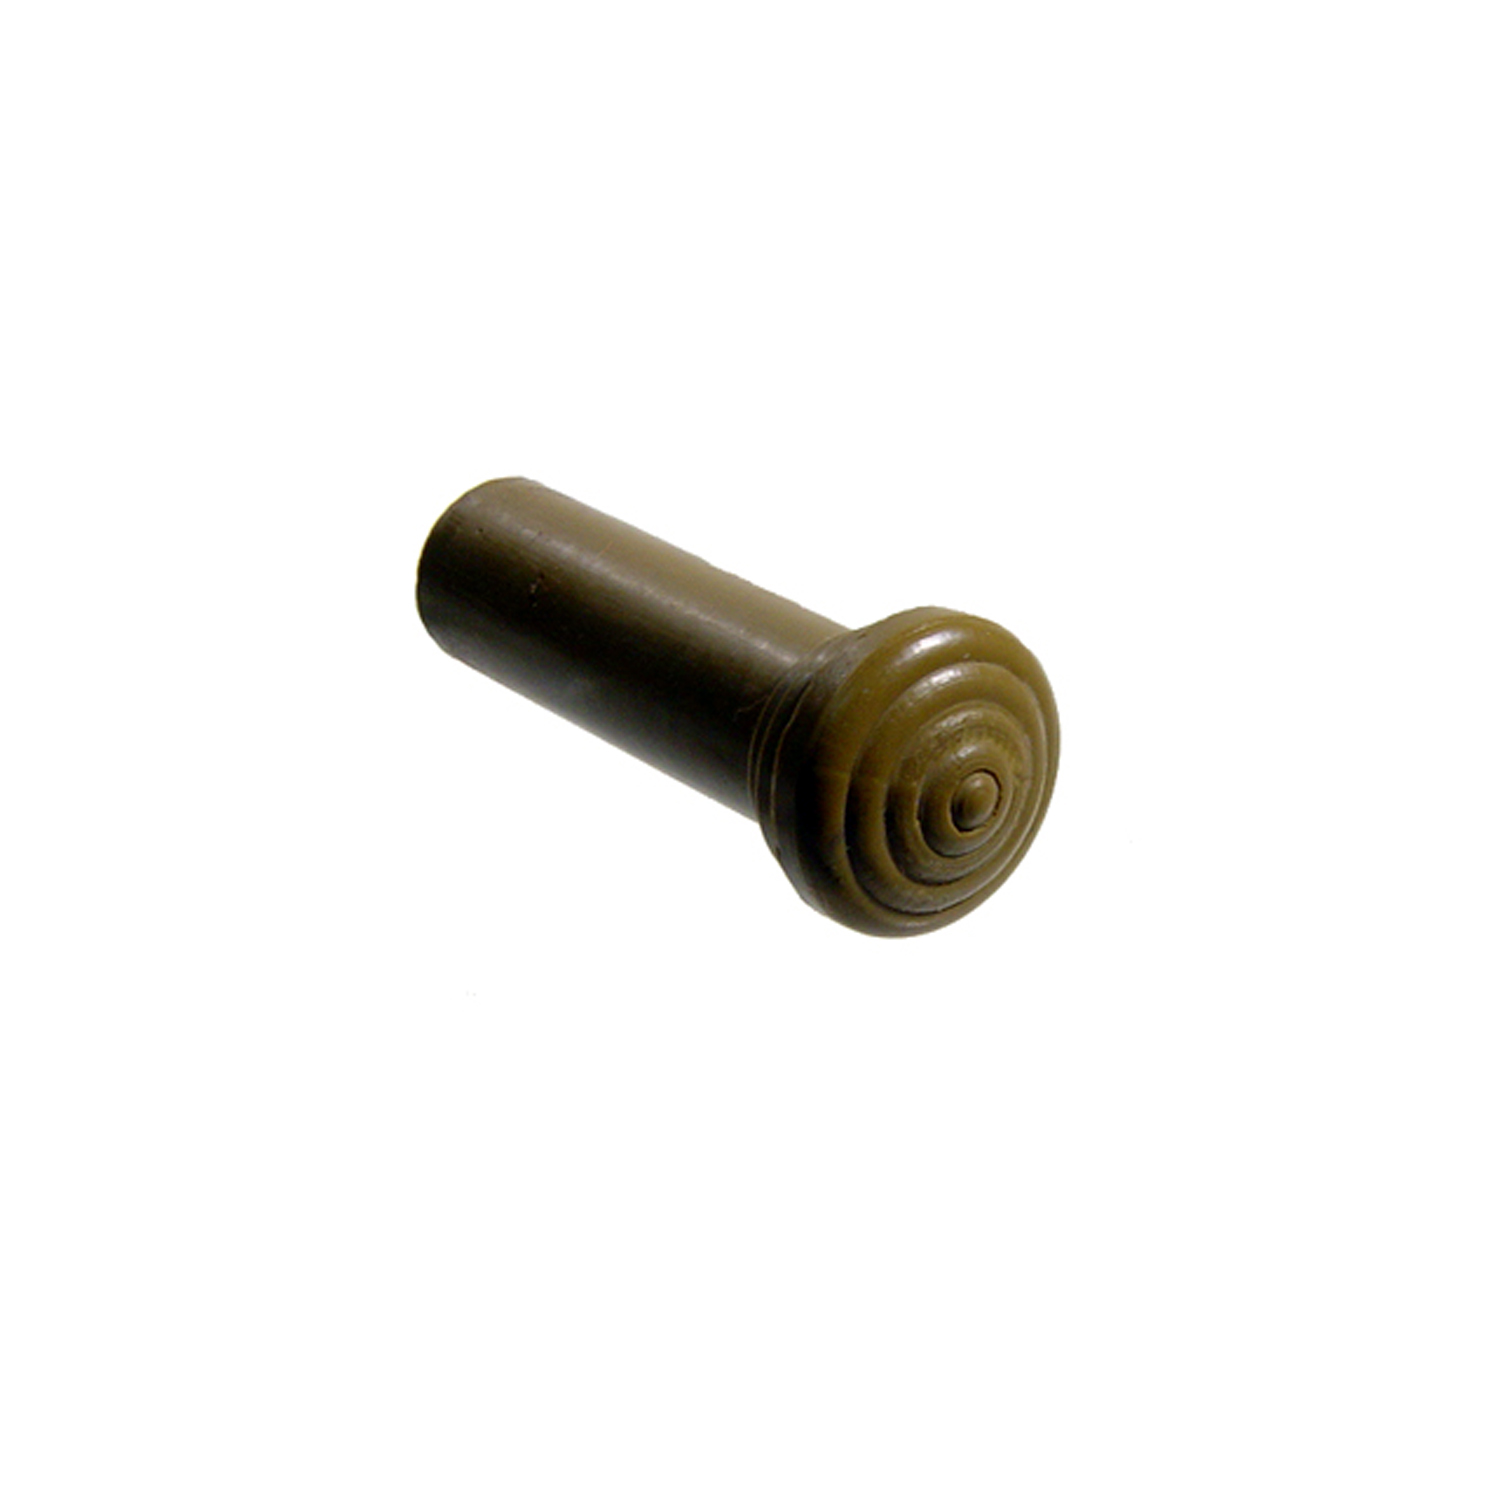 1957 Cadillac DeVille Door Lock Knob.  Made of Olive Green rubber, self-threading-RP 304-G